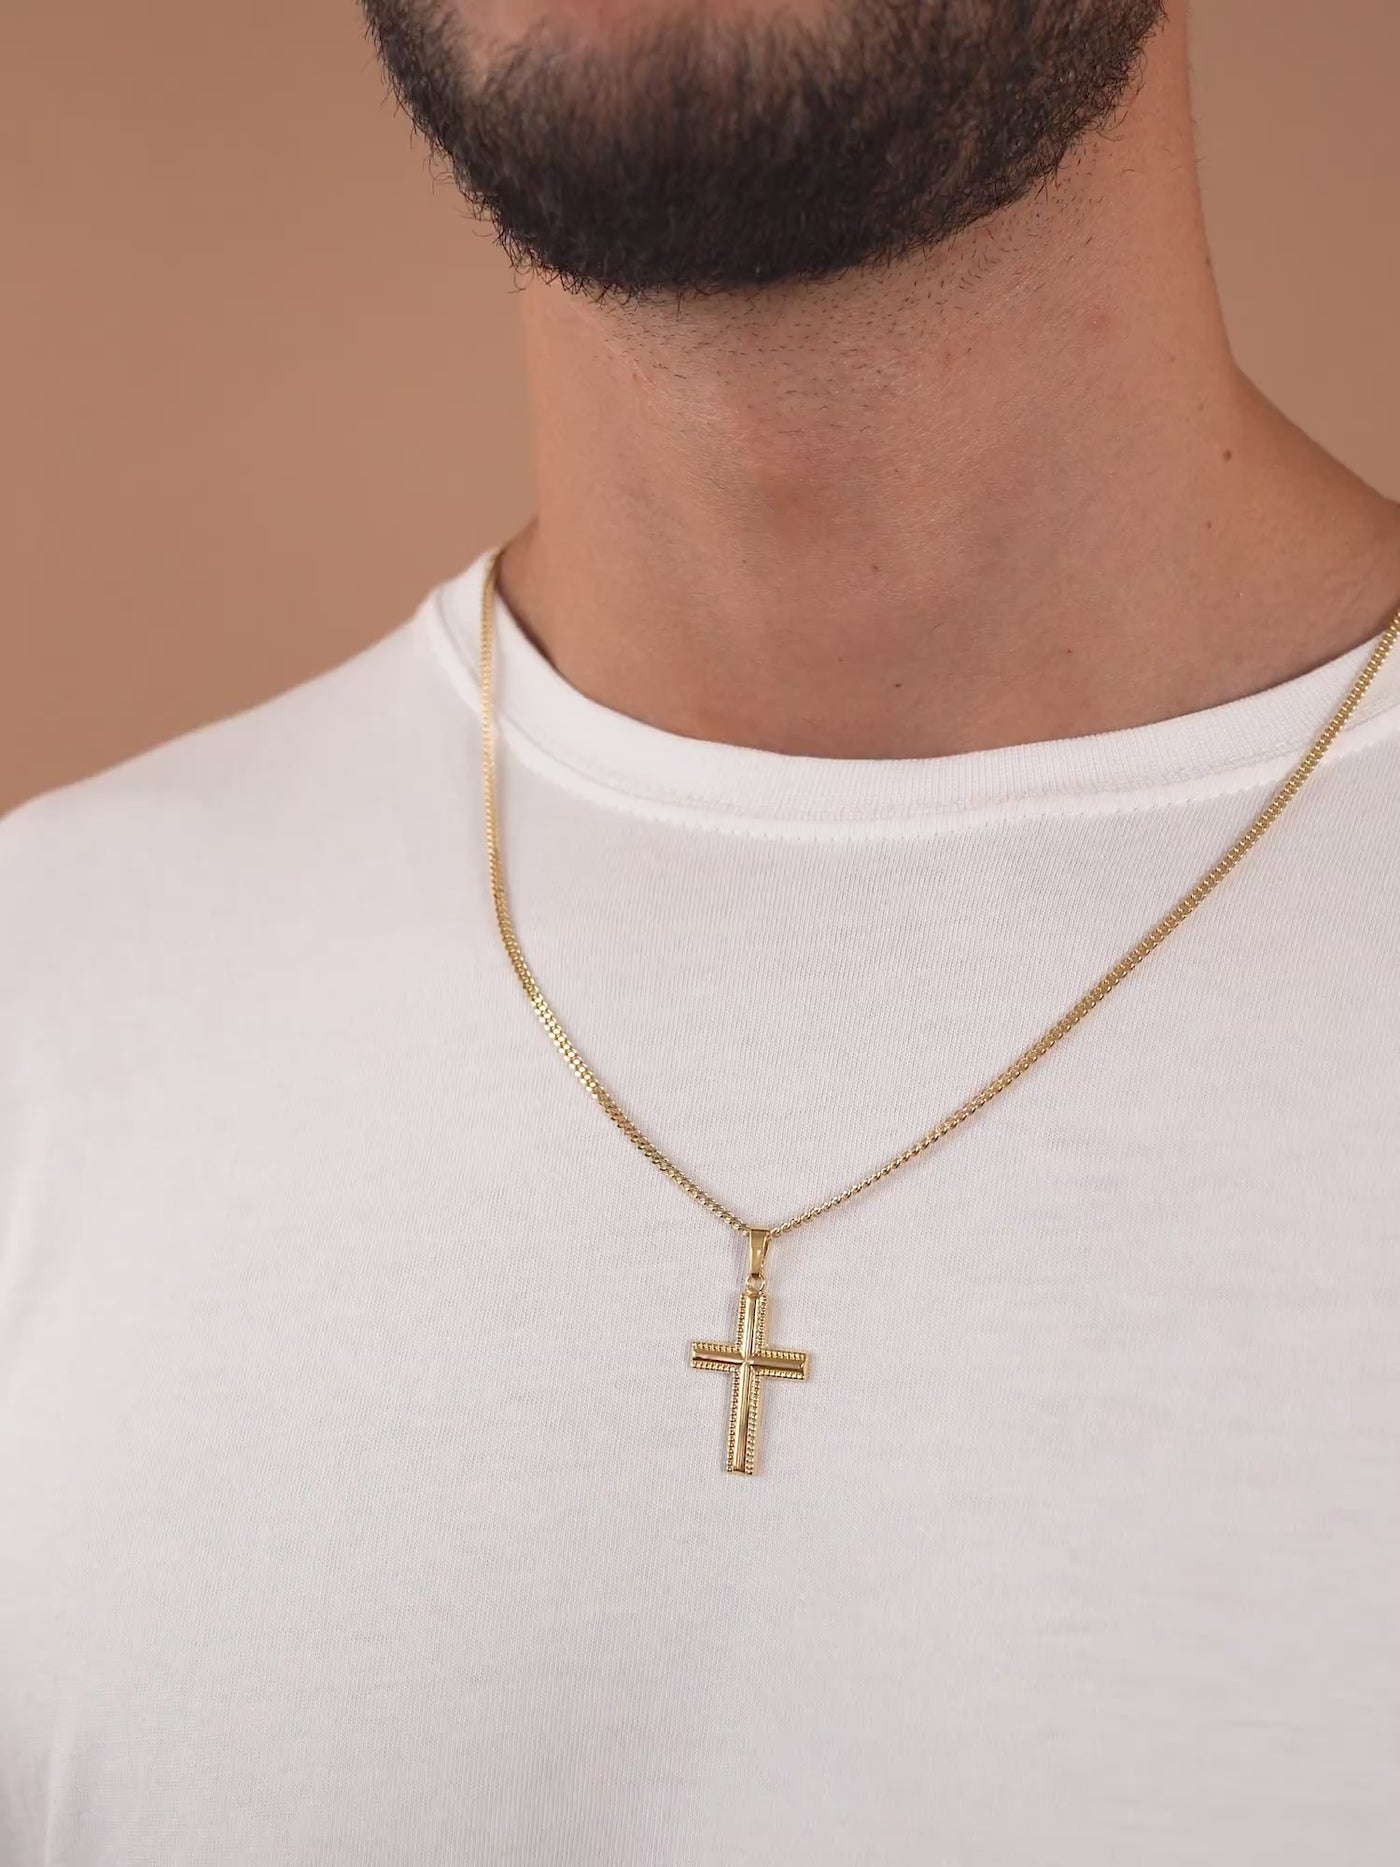 CROSS NECKLACE 925 SILVER 18 KARAT GOLD PLATED